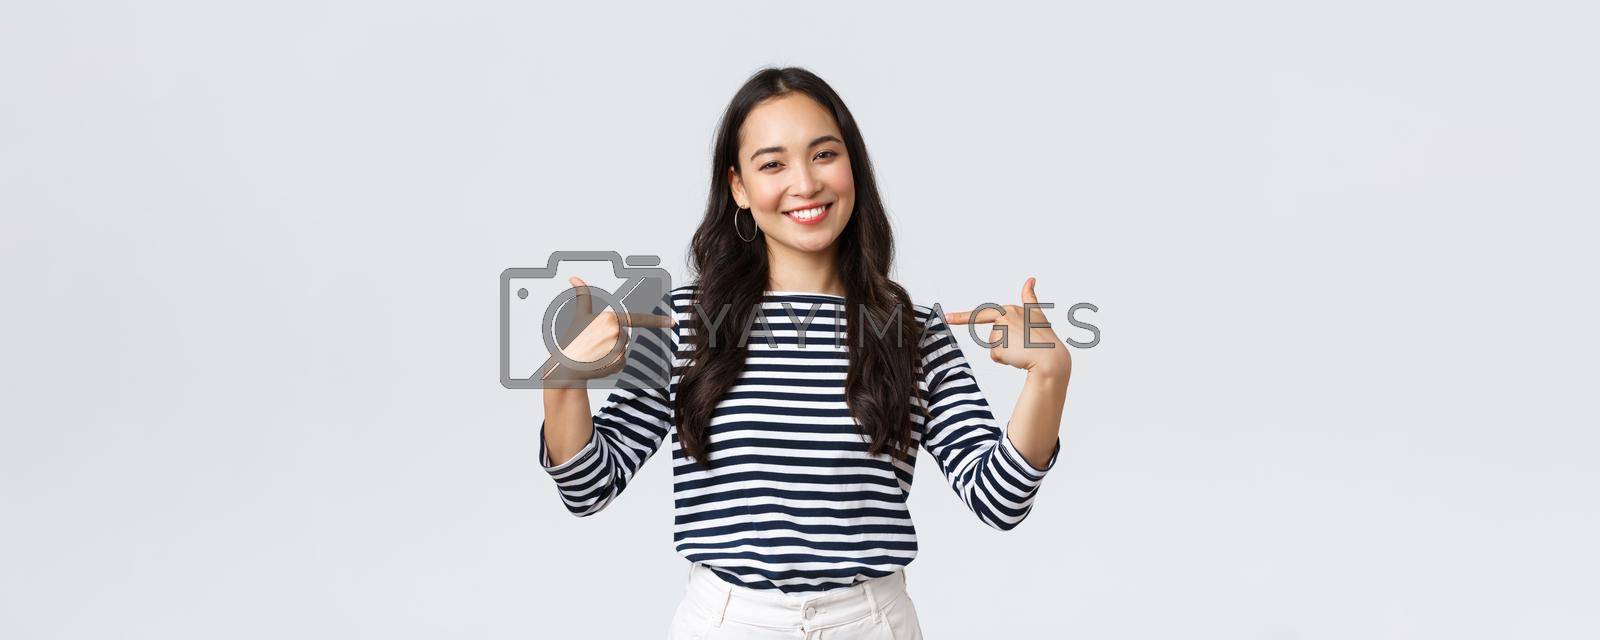 Lifestyle, beauty and fashion, people emotions concept. Smiling friendly-looking woman ready to help, pointing herself with pleasant look, bragging own accomplishments, whtie background.